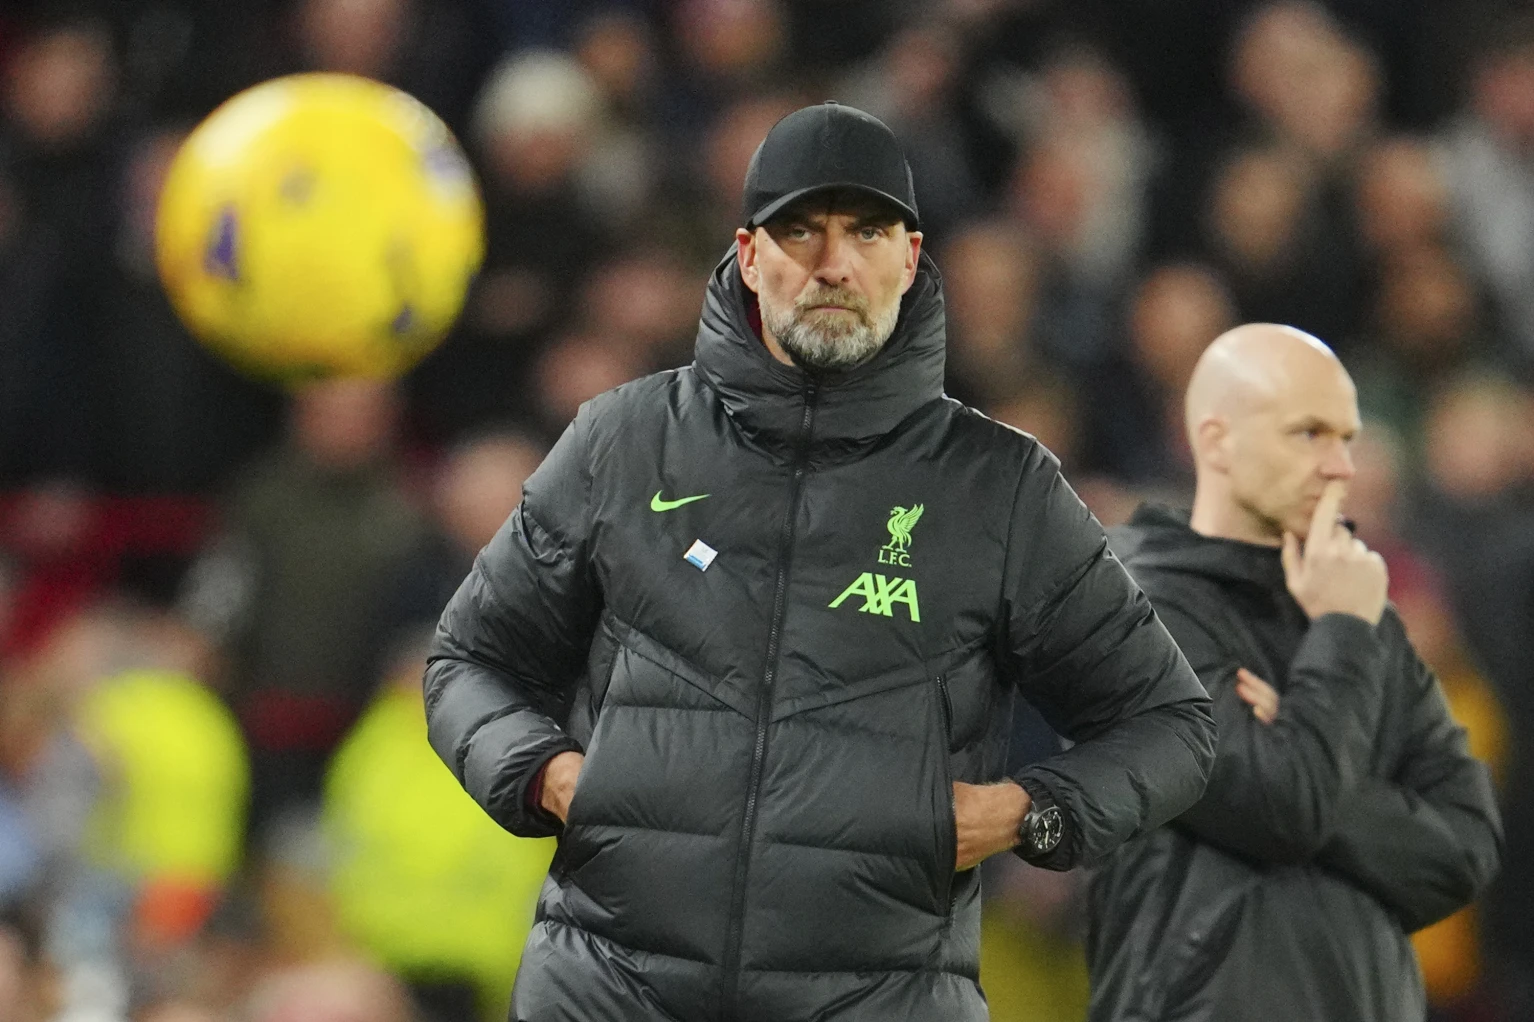 Liverpool under Jurgen Klopp pops up from nowhere to become genuine EPL title prospects